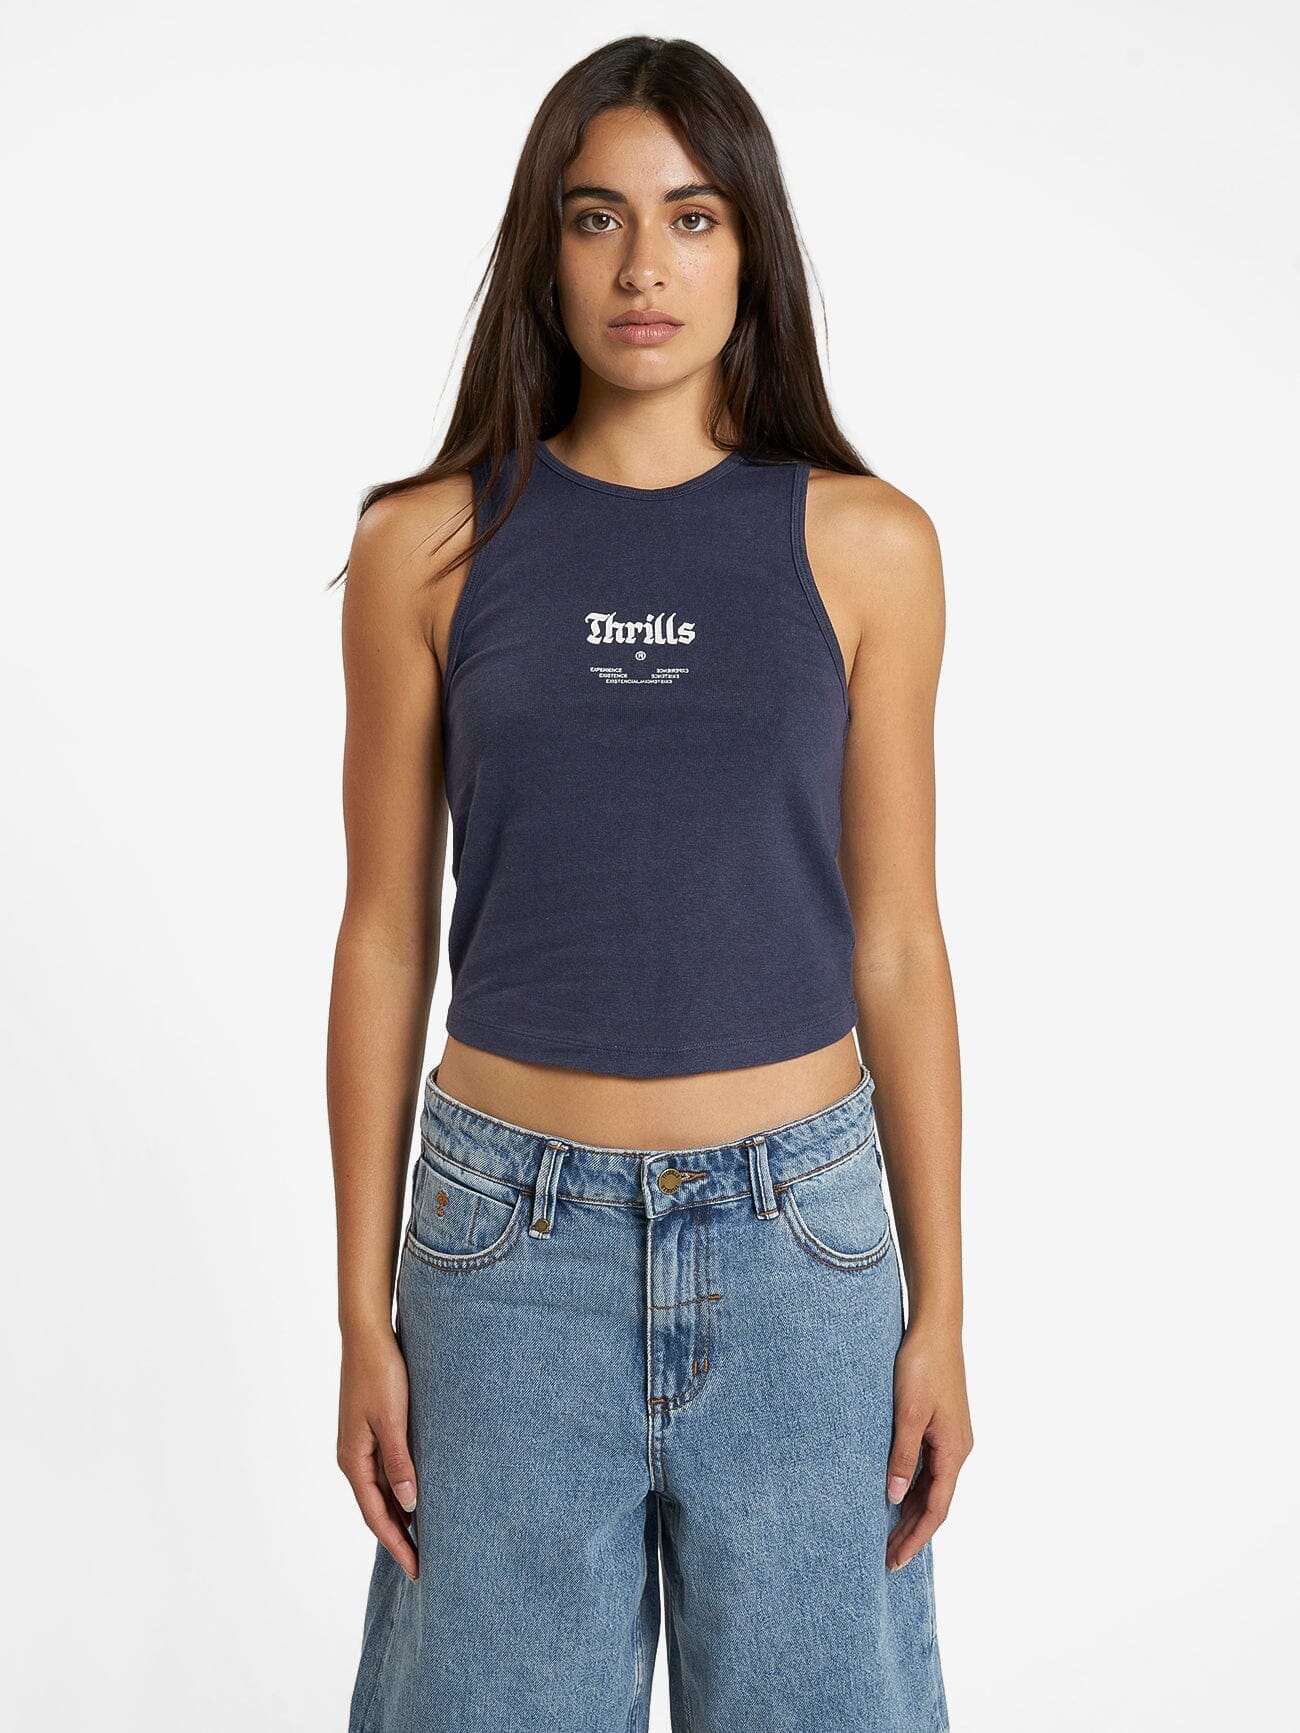 Wishes Come True Hemp Curve Tank - Station Navy